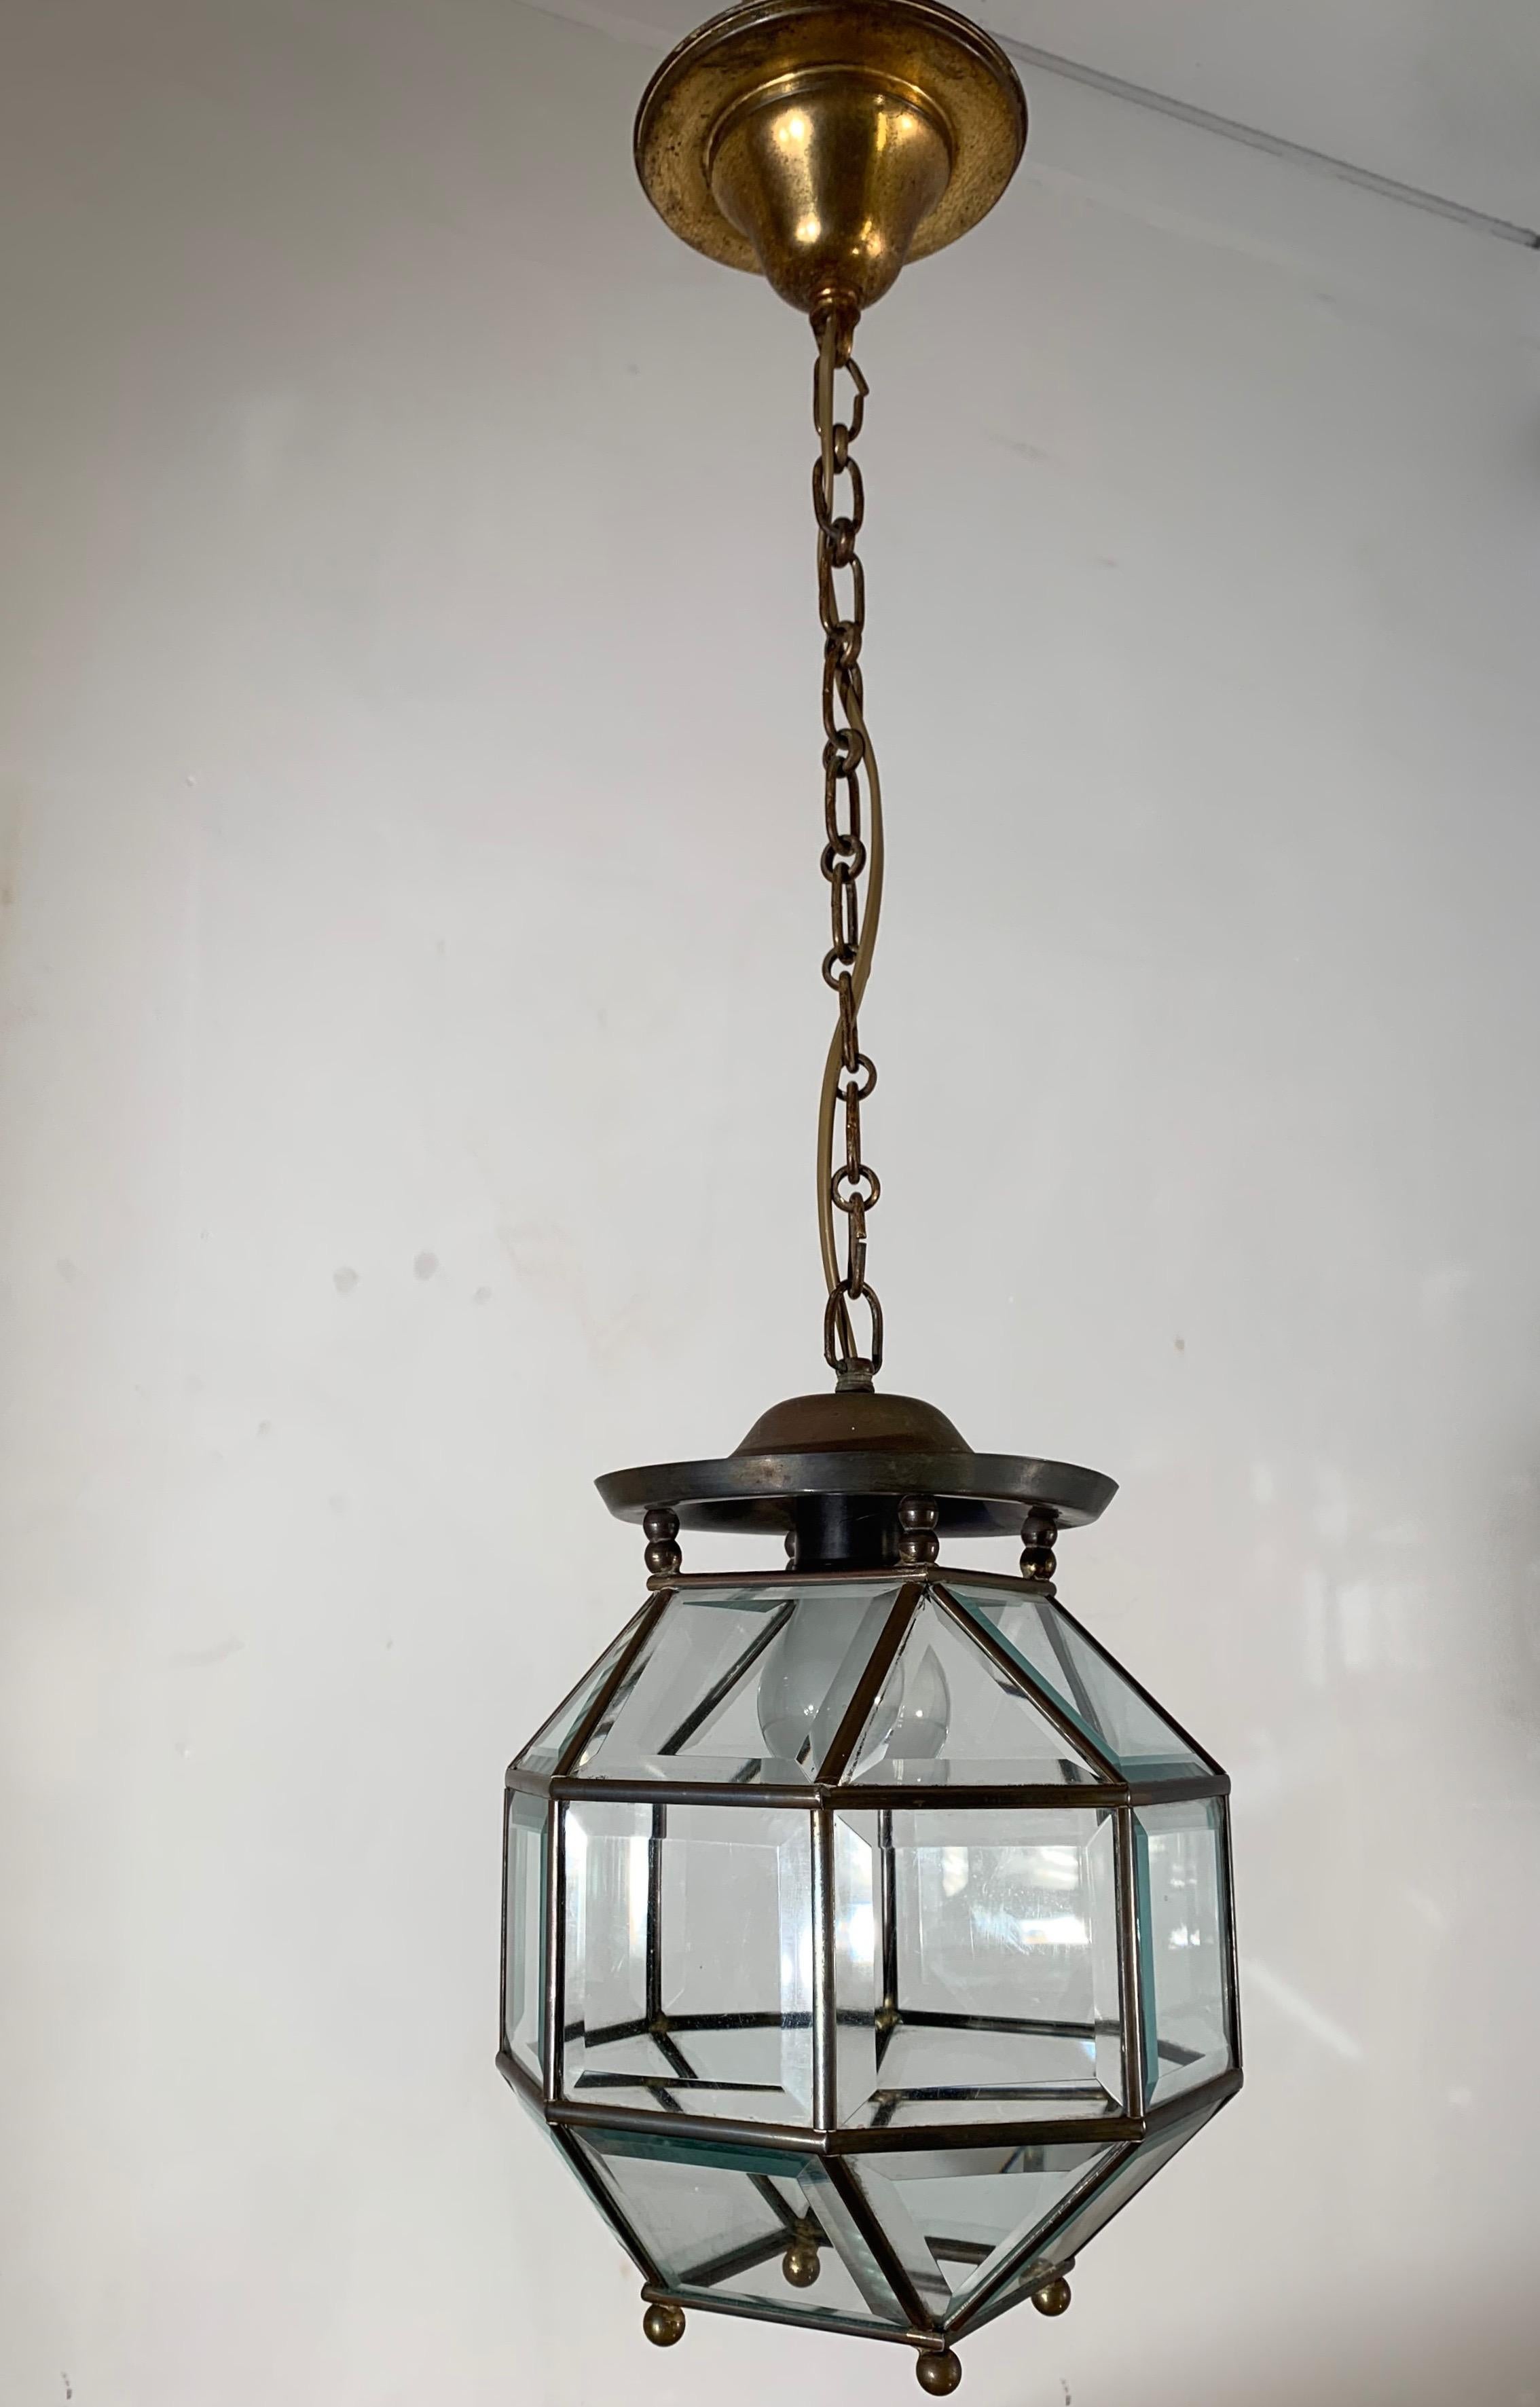 European Early 1900s Bevelled Glass & Brass Pendant Cubic Ceiling Light  Adolf Loos Style